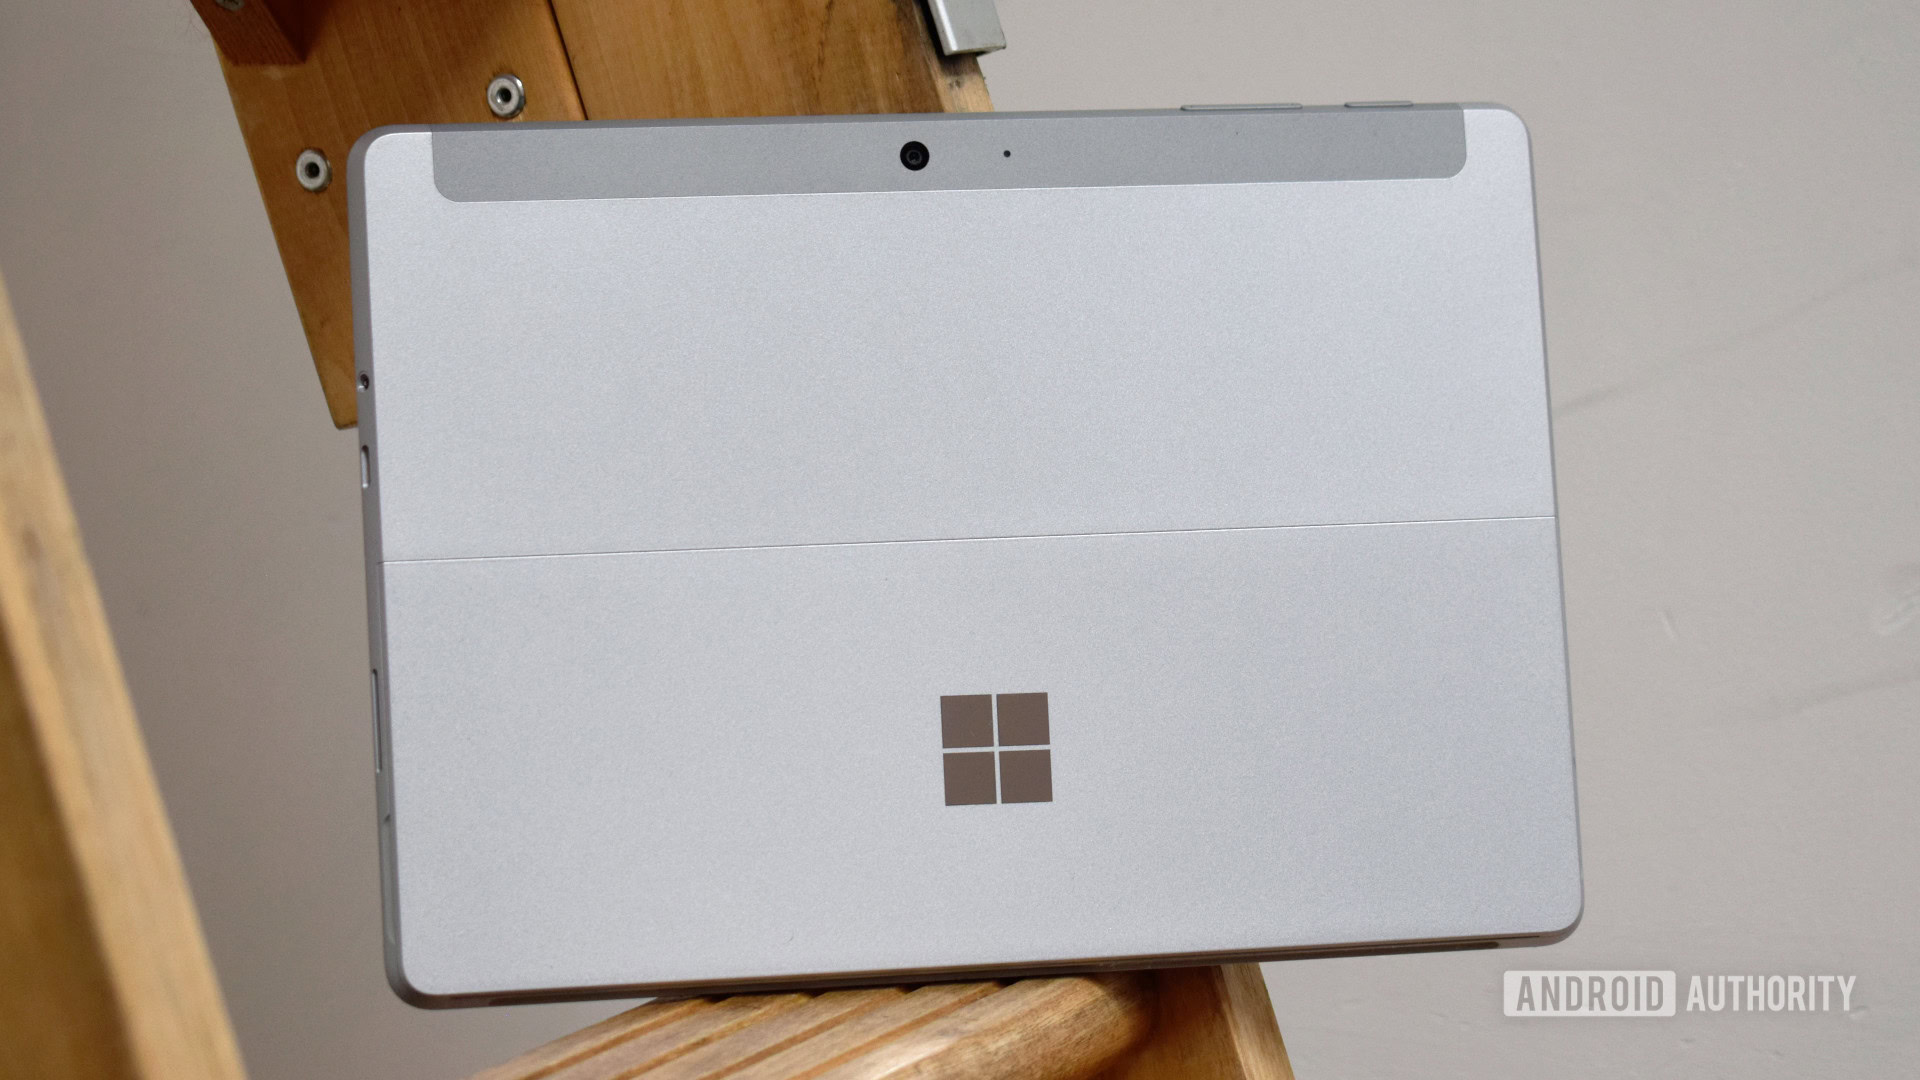 The Microsoft Surface Go 2 back view showing the Windows logo.